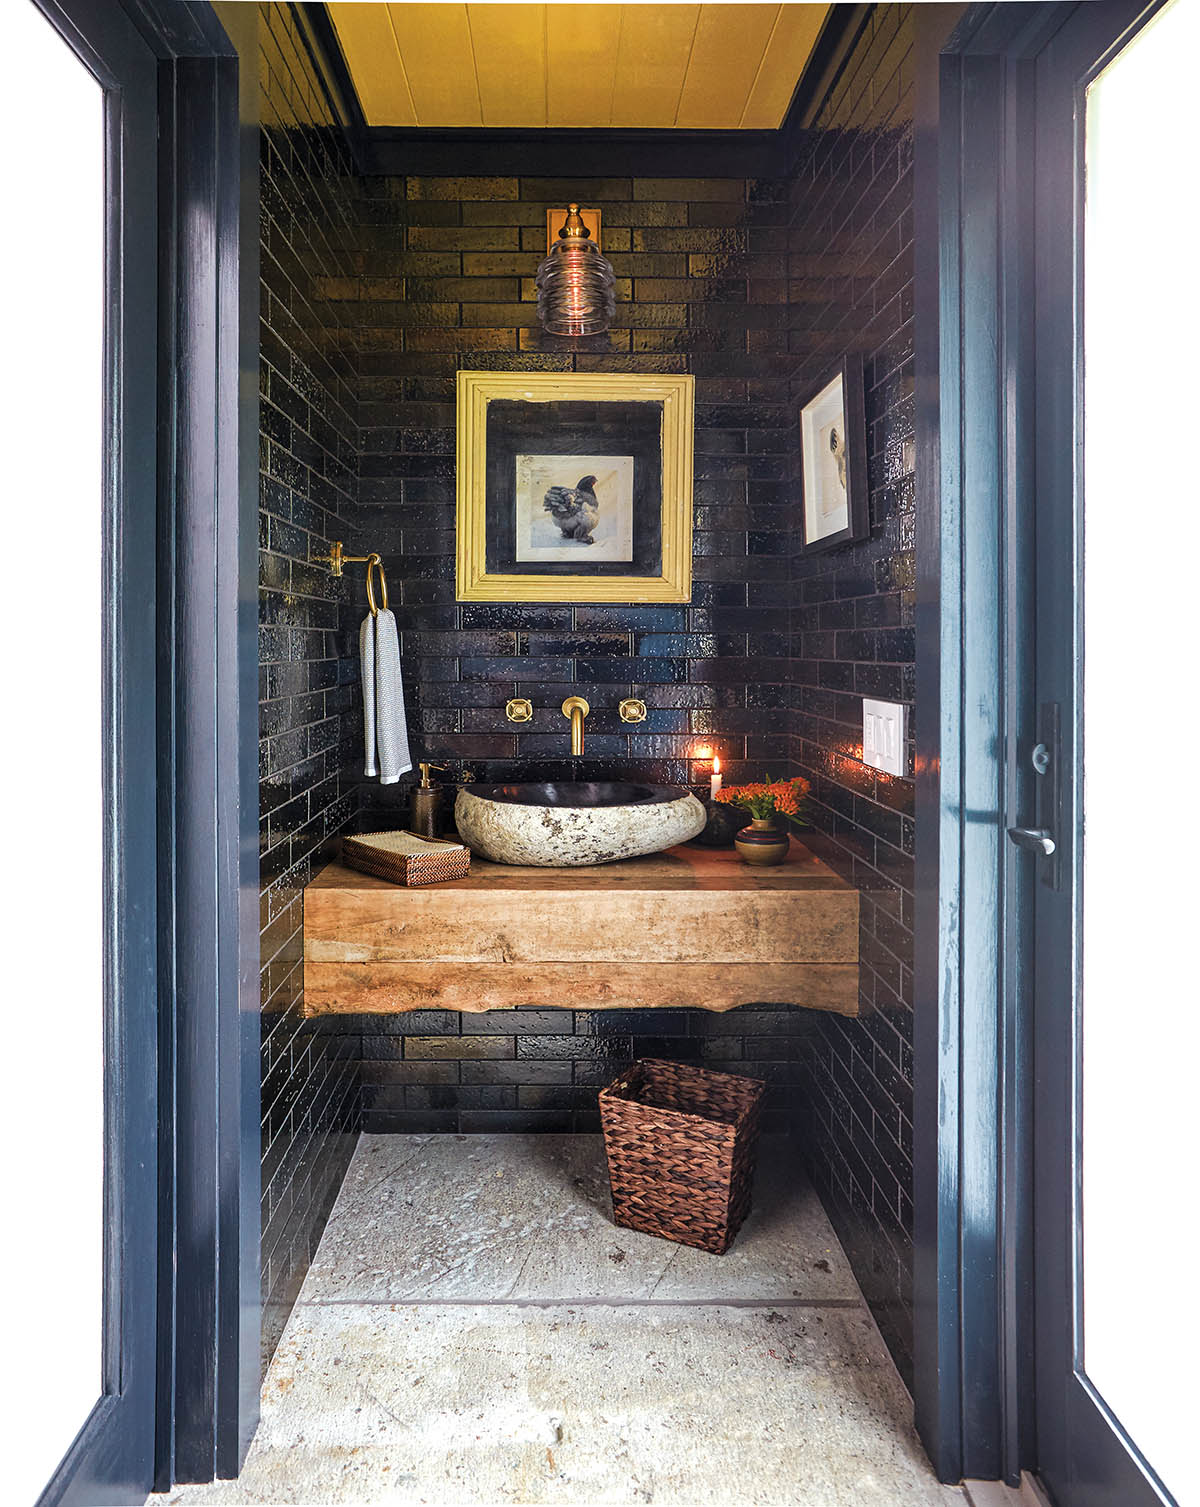 Blue tiled powder room in old stable that has been converted to a space for entertaining.